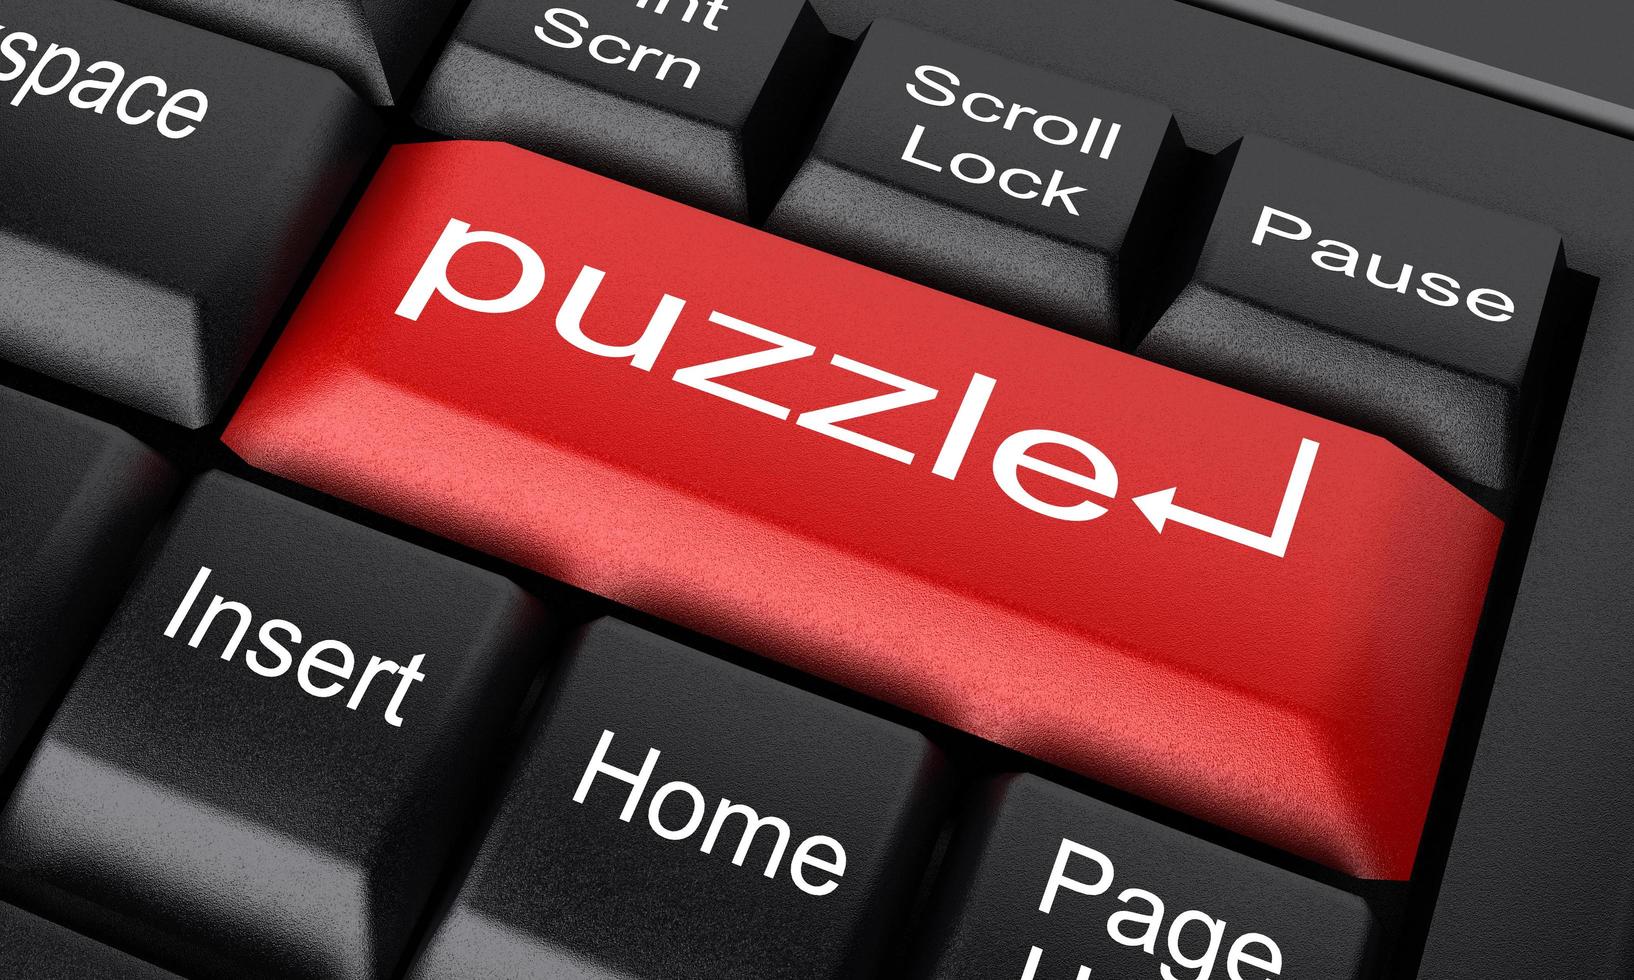 puzzle word on red keyboard button photo